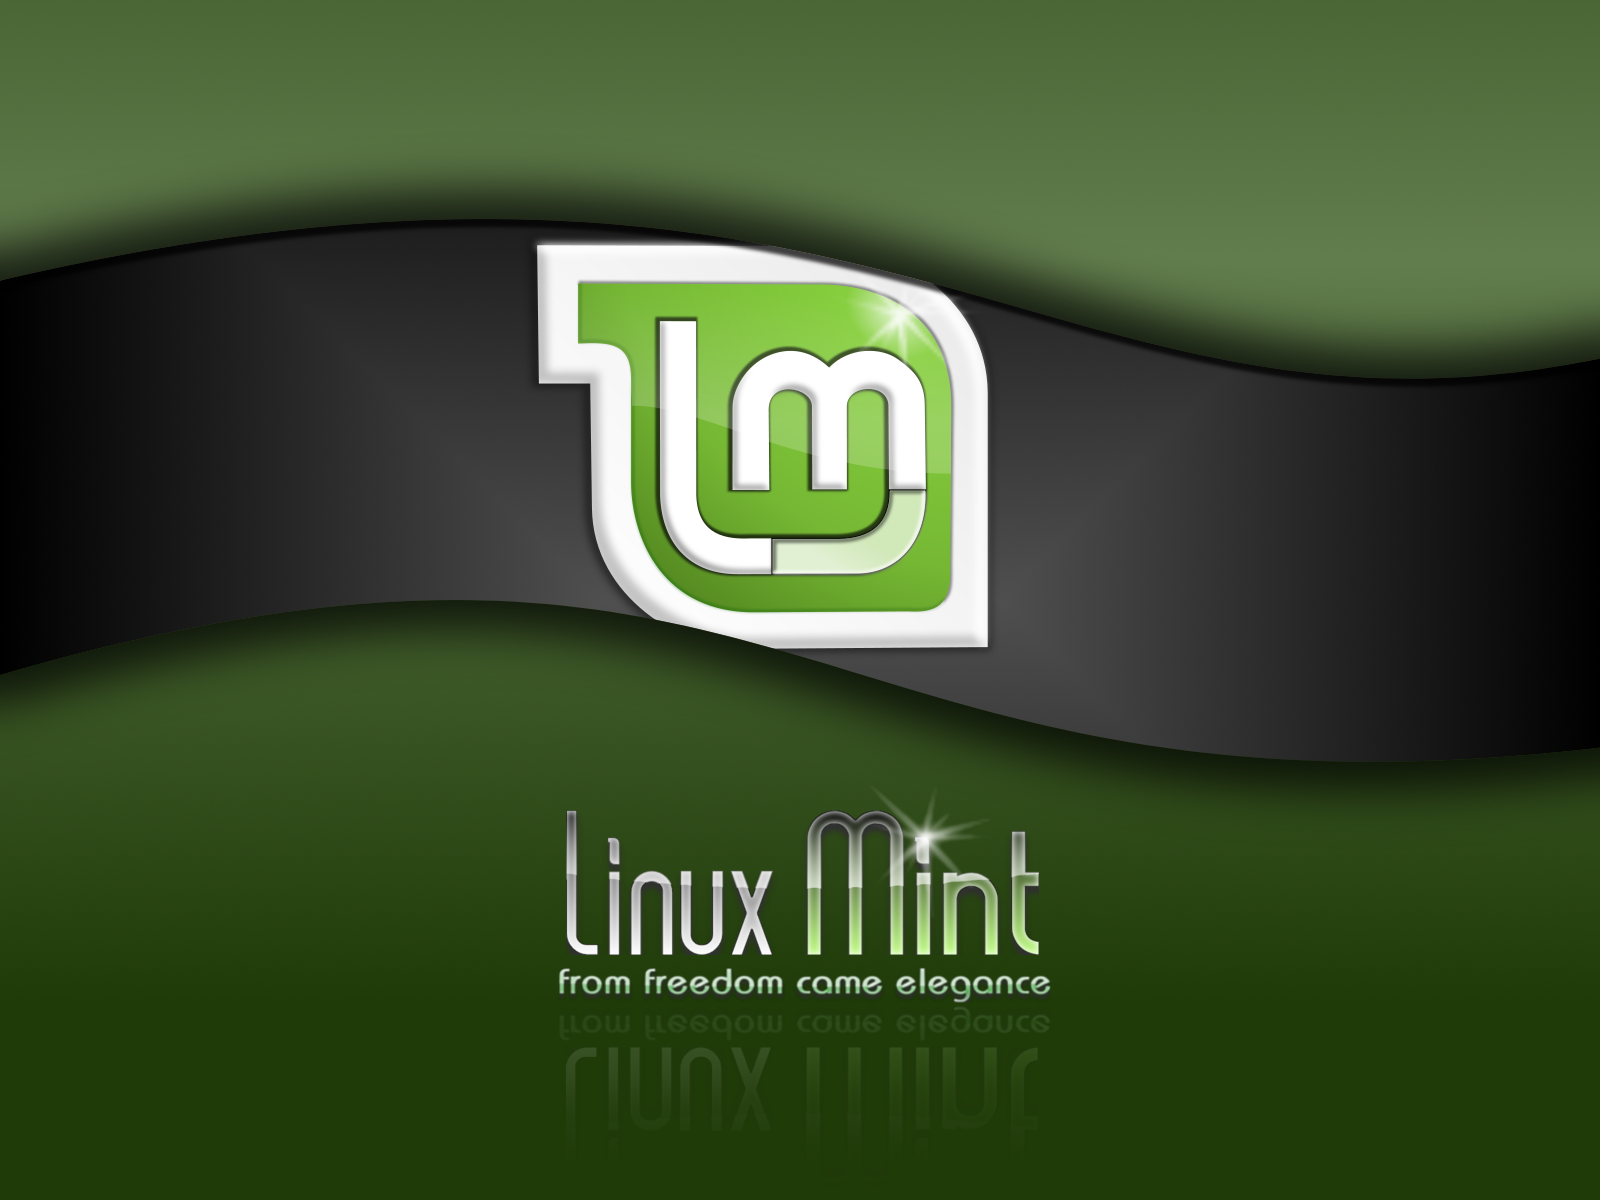 full review of linux on wallpaper posted here i changed Linux